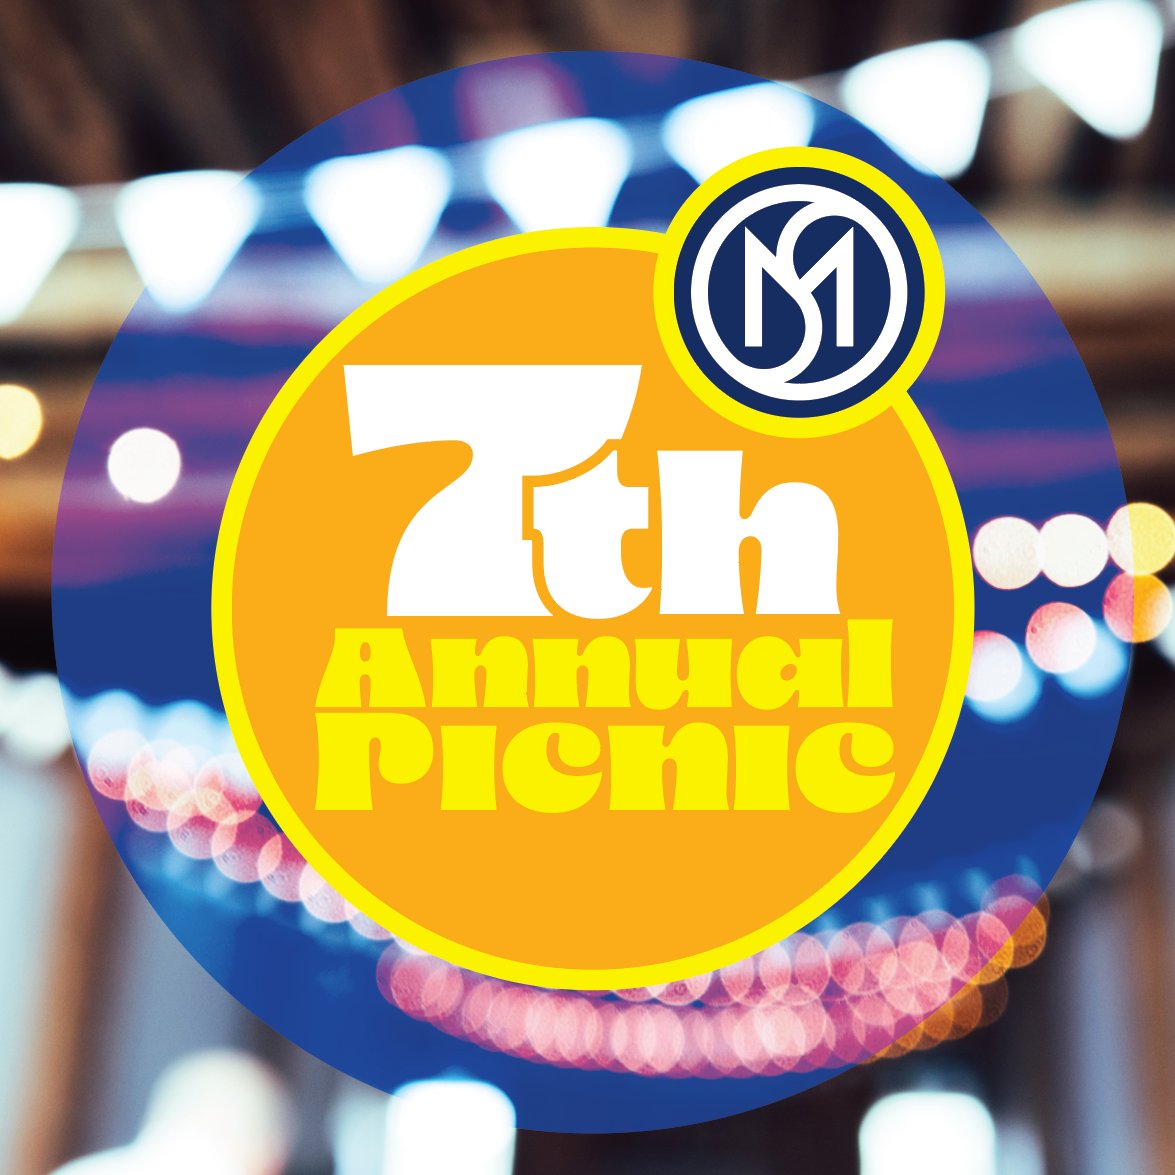 Next week is our 7th Annual M&S Company Picnic! We love getting everyone together every year for our company picnic to network and catch up! Events like these allow all of our team, from their various locations, to get together and have a great time! 🧺 #DoneBetterTogether